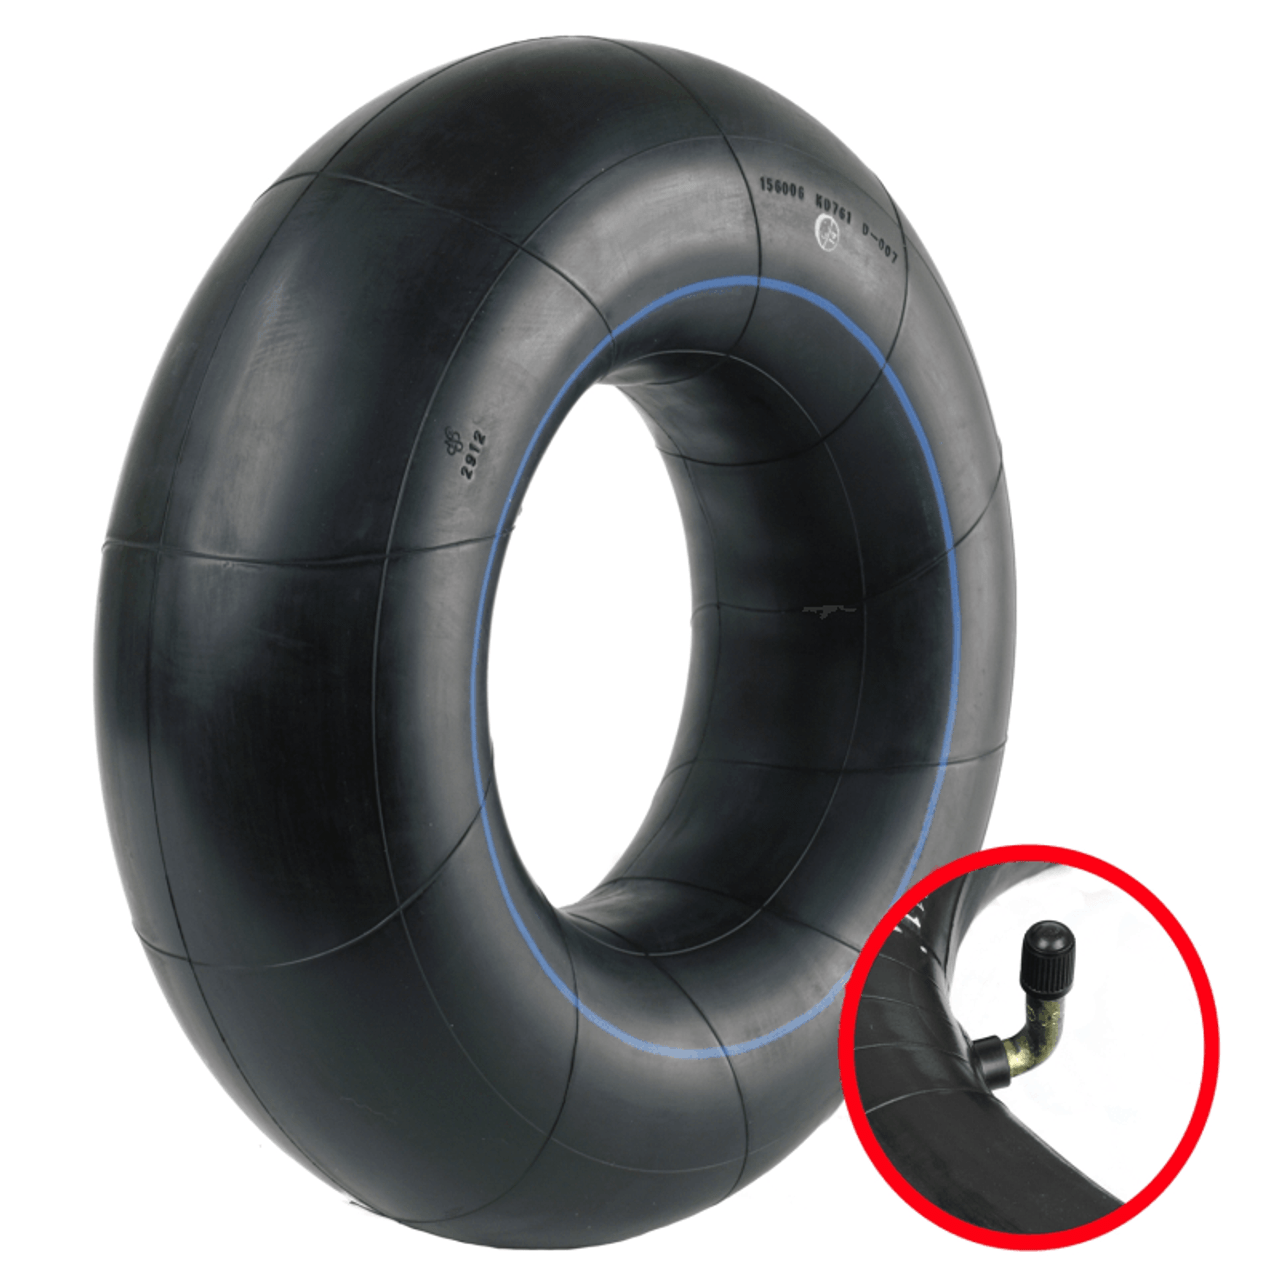 Premium replacement tire inner tube made with quality butyl rubber to repair your power equipment with confidence. This tube fits select Ariens 922 Series and 832 Series Sno-Thro models.